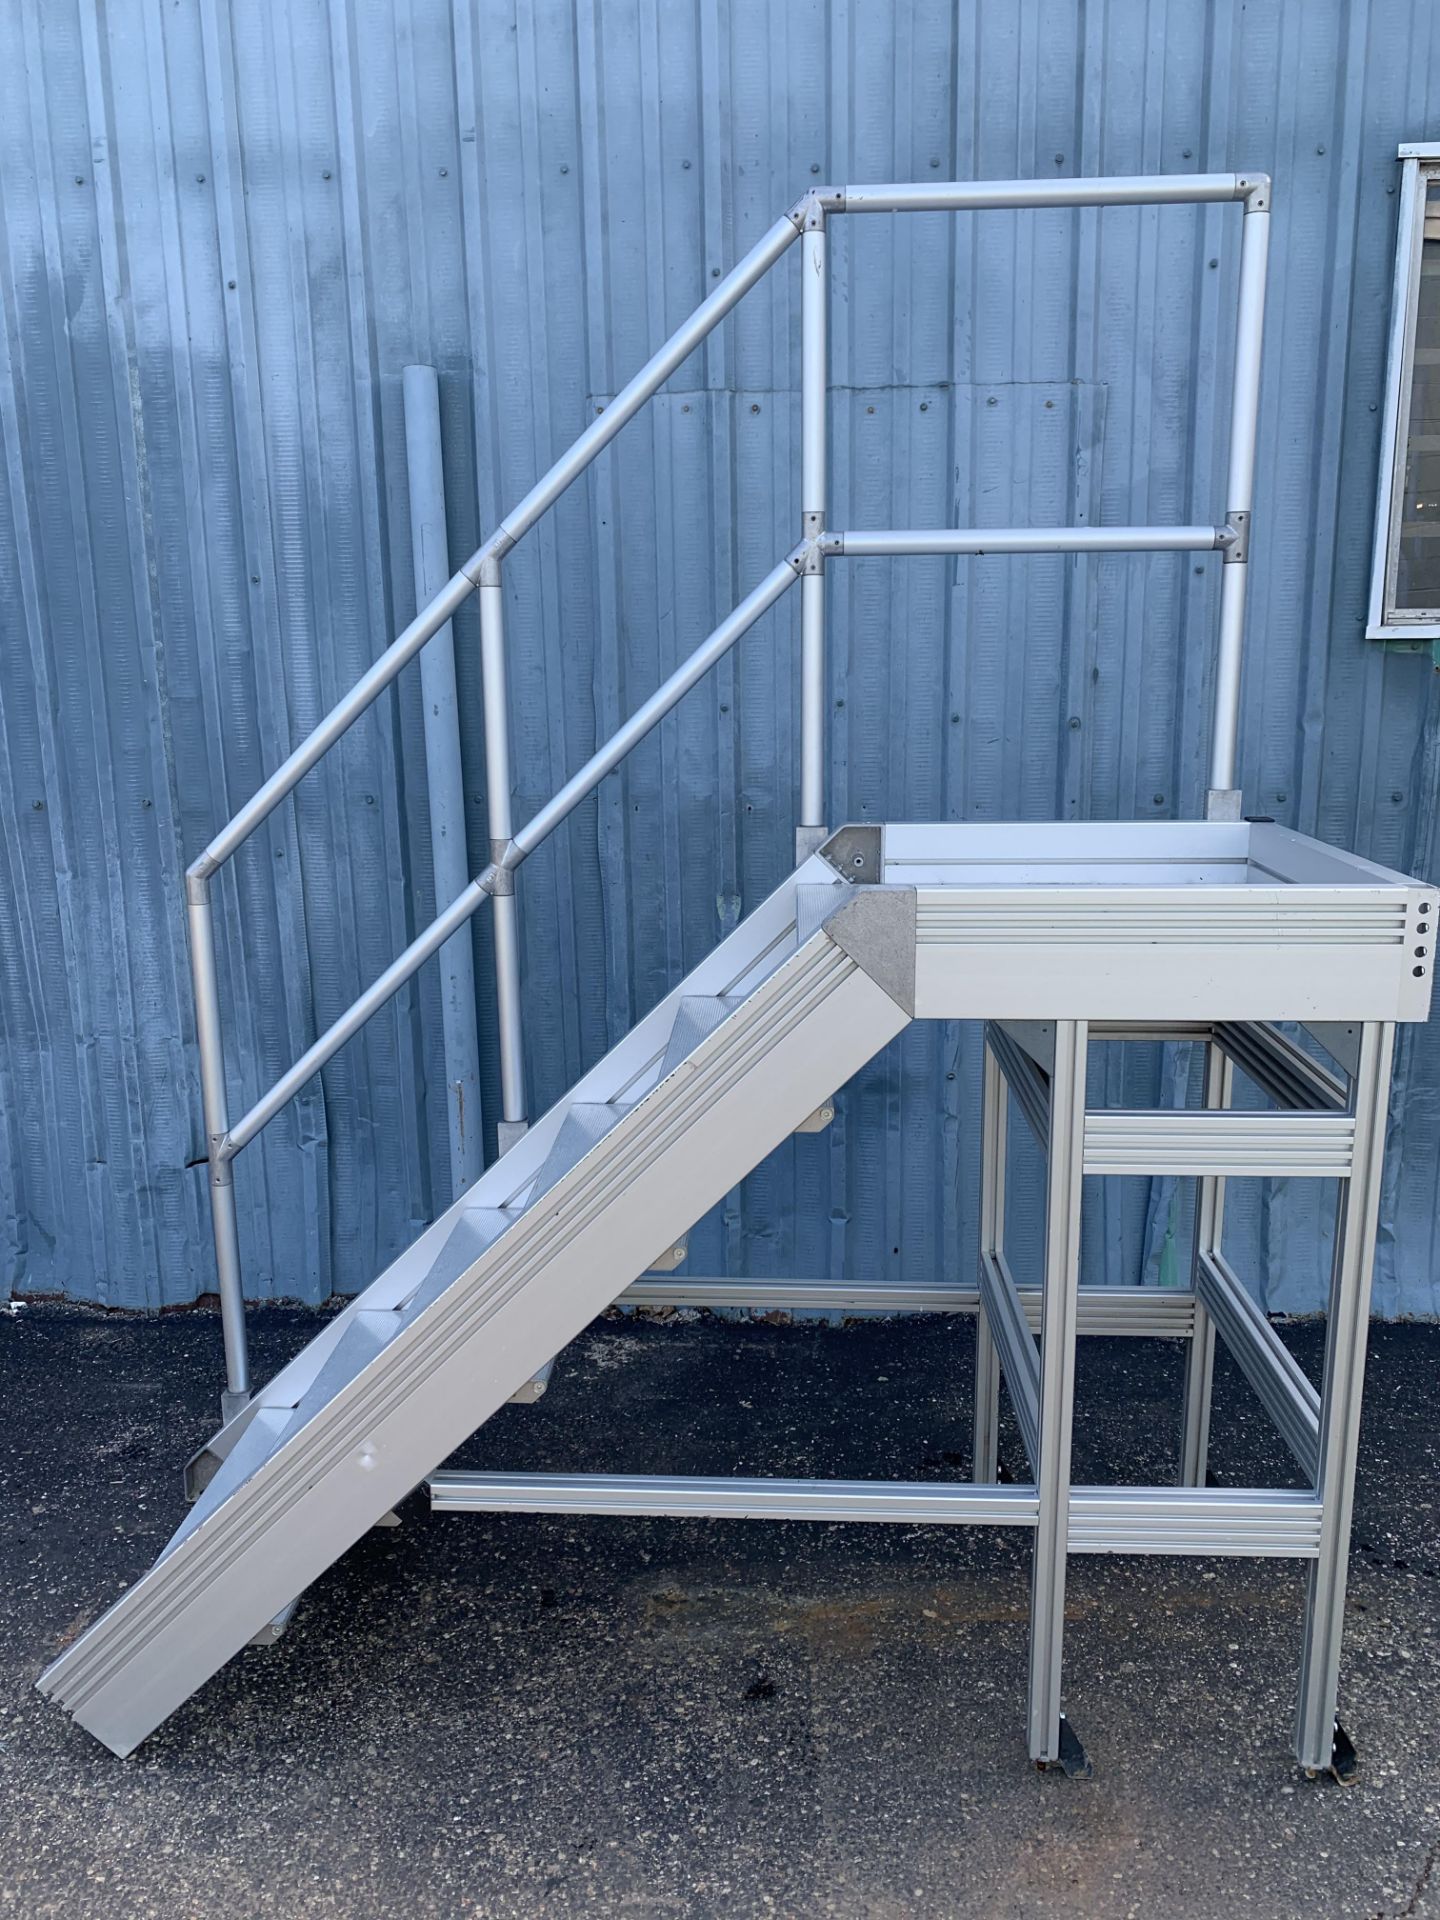 UNKNOWN BRAND ALUMINUM STAIRS WITH RAIL, 6-STEPS, TOP PLATFORM STEP 50" HIGH